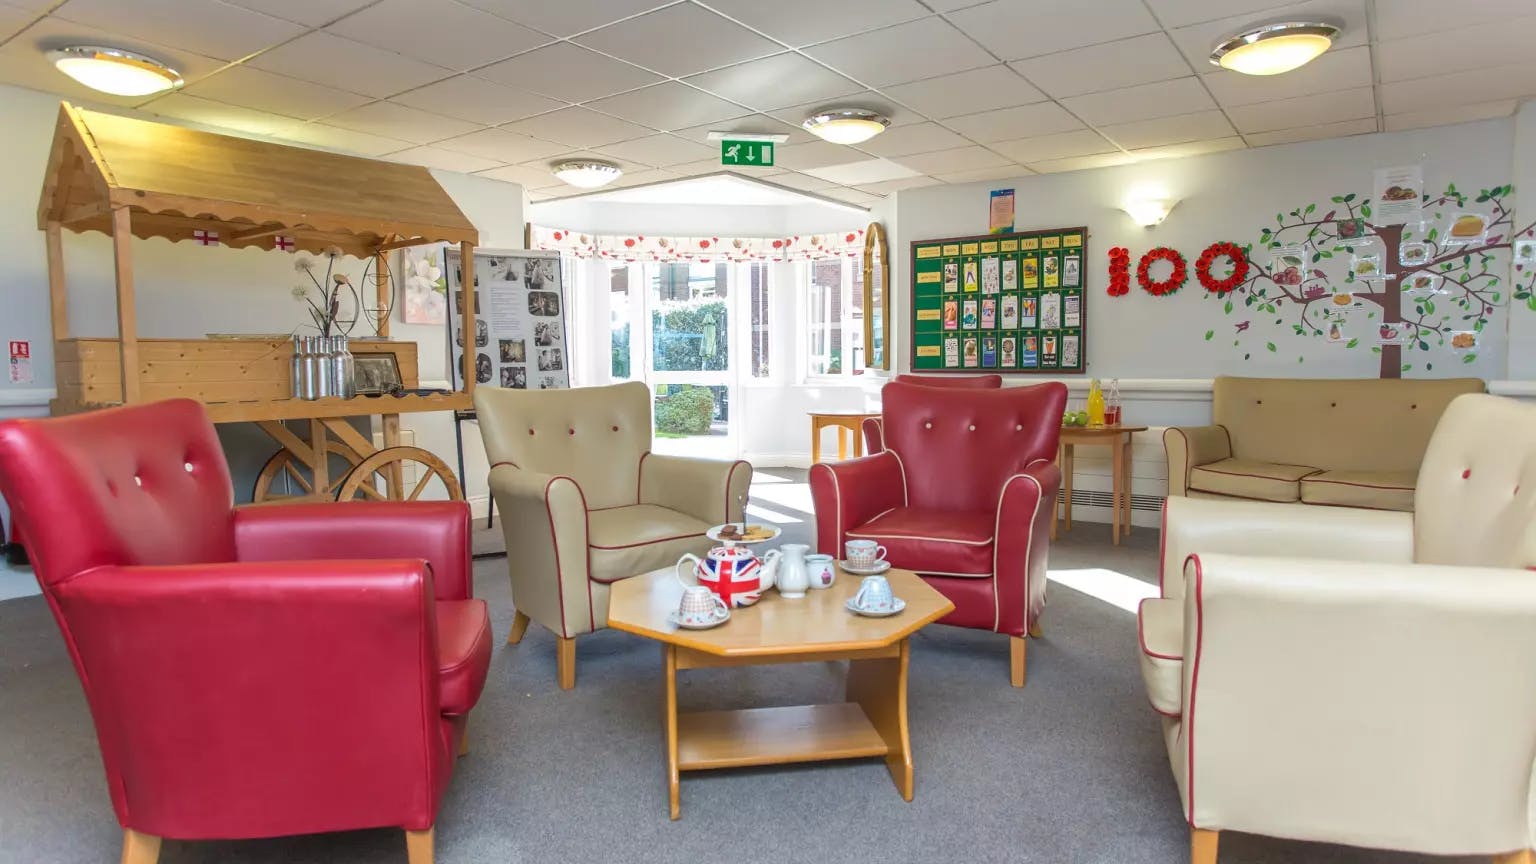 Lounge of Greenacres care home in Hatfield, Hertfordshire